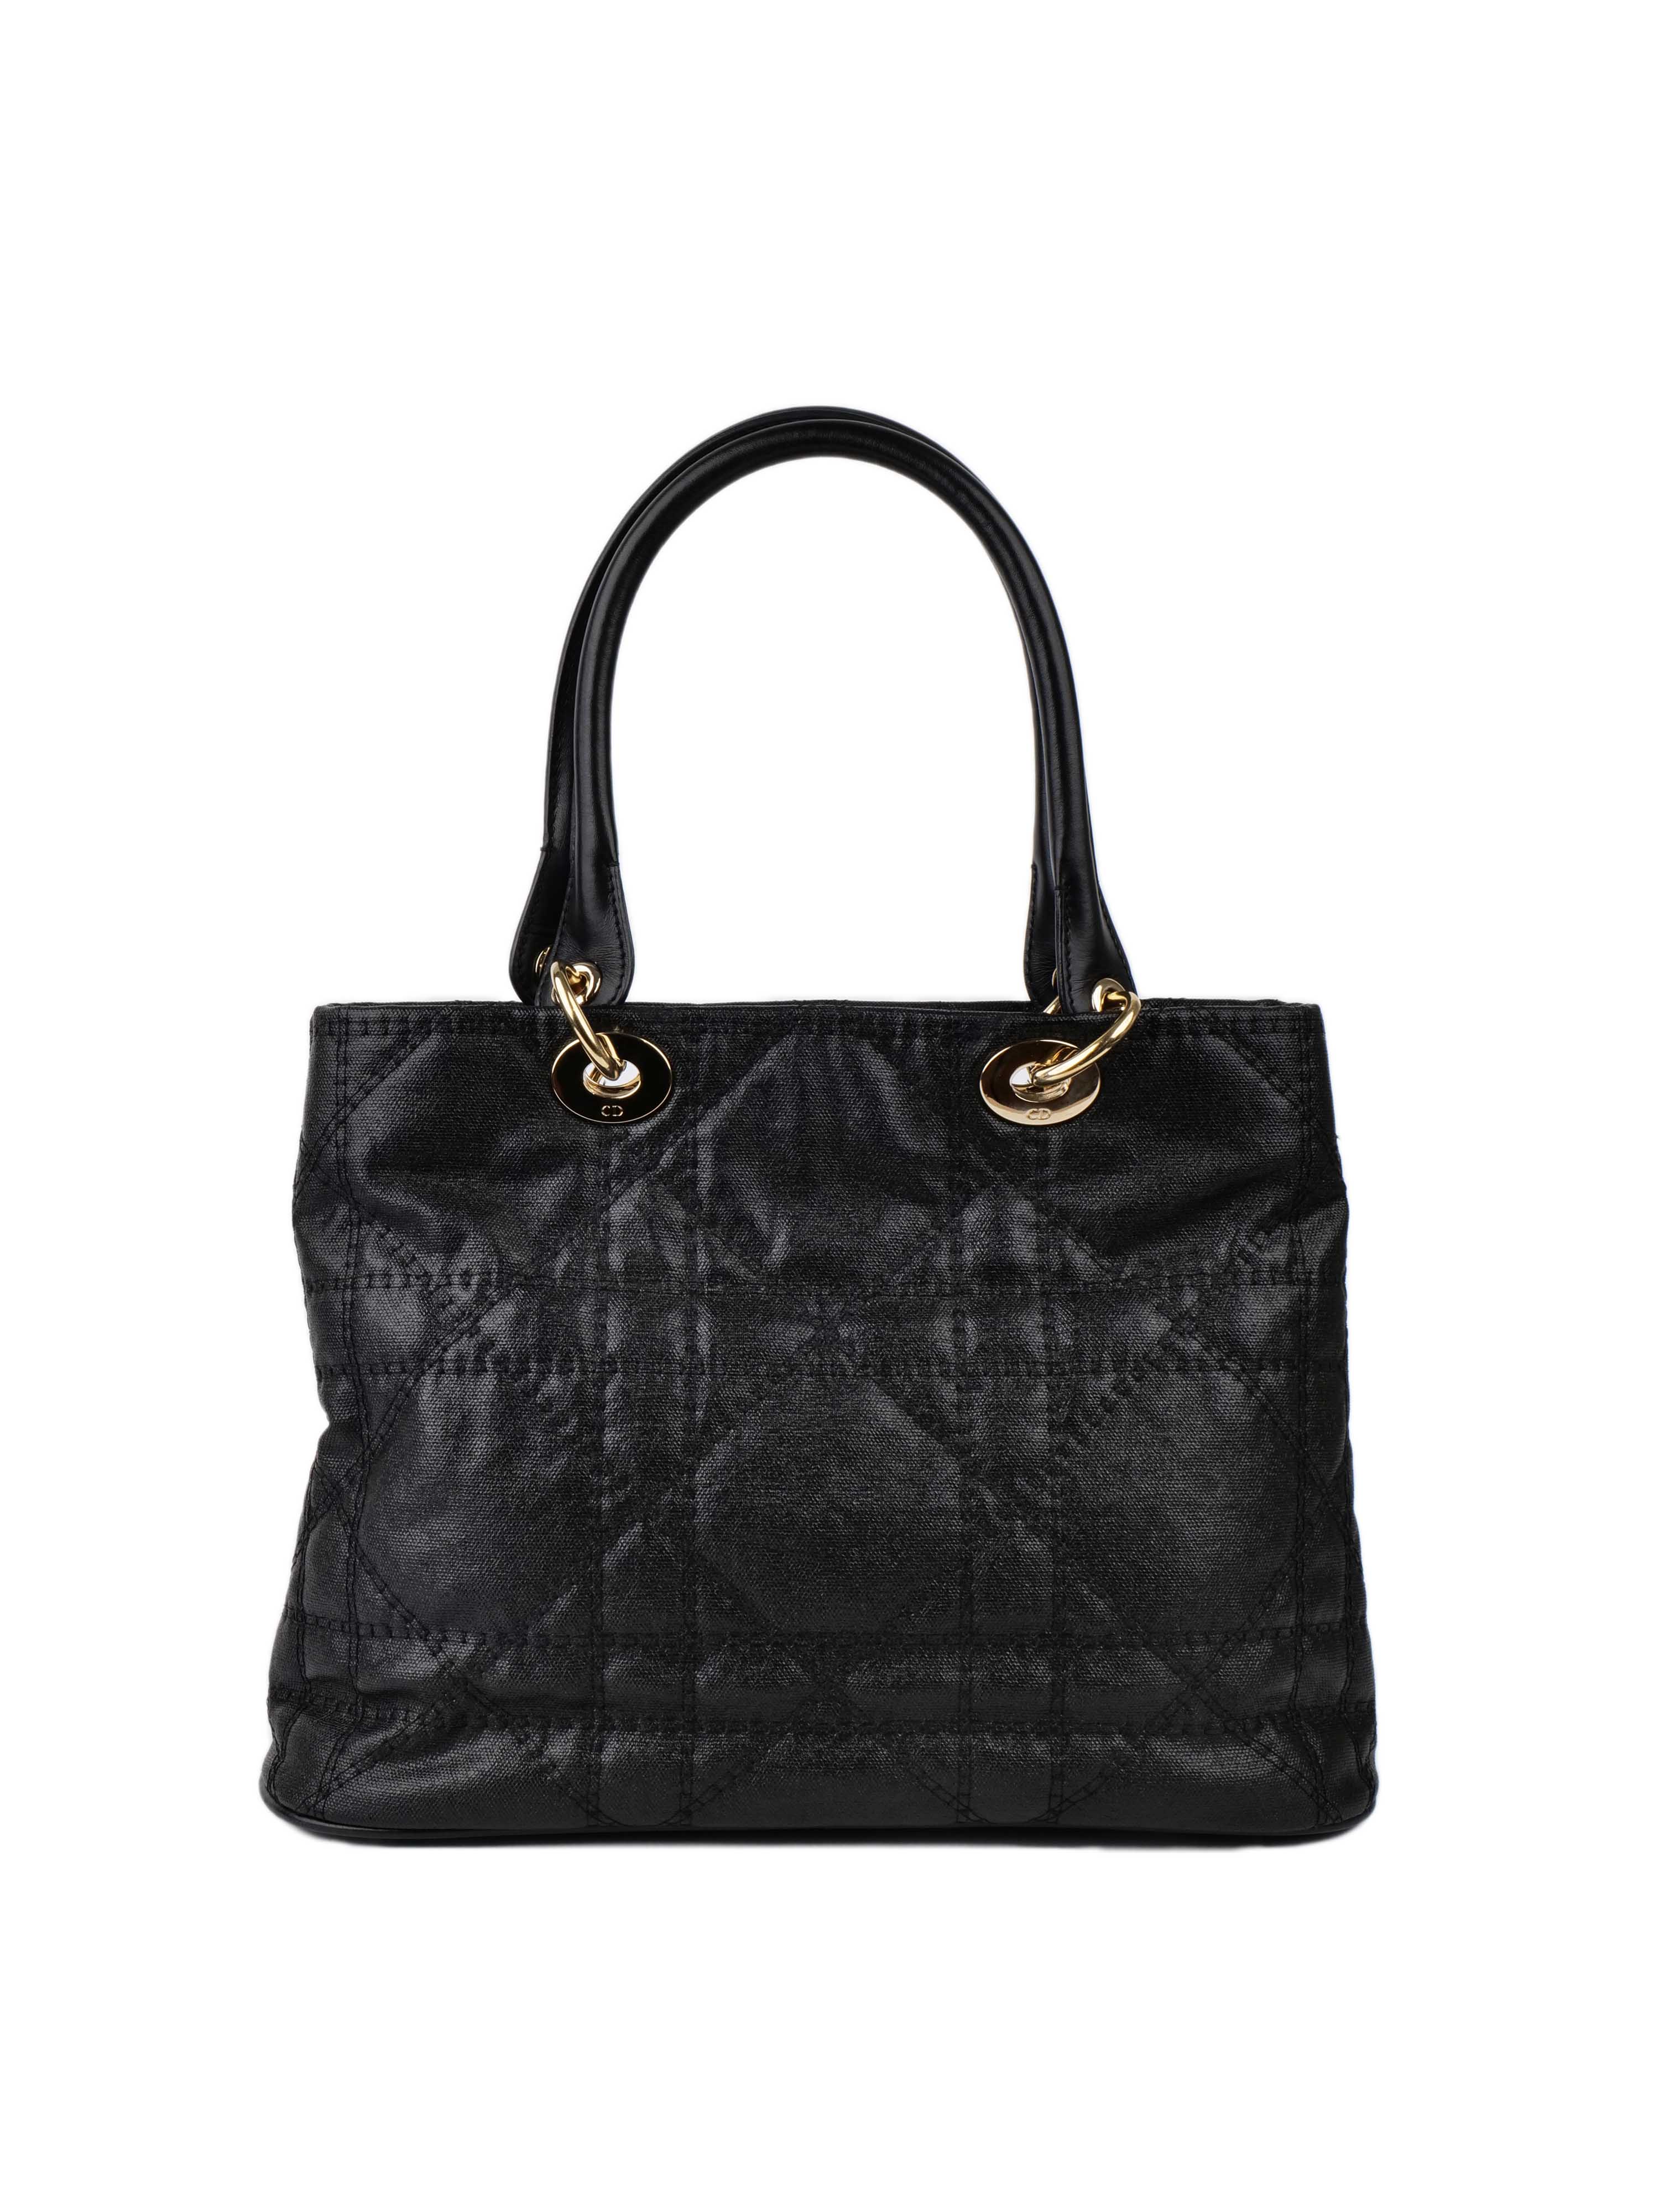 Dior Black Quilted Soft Tote Bag.